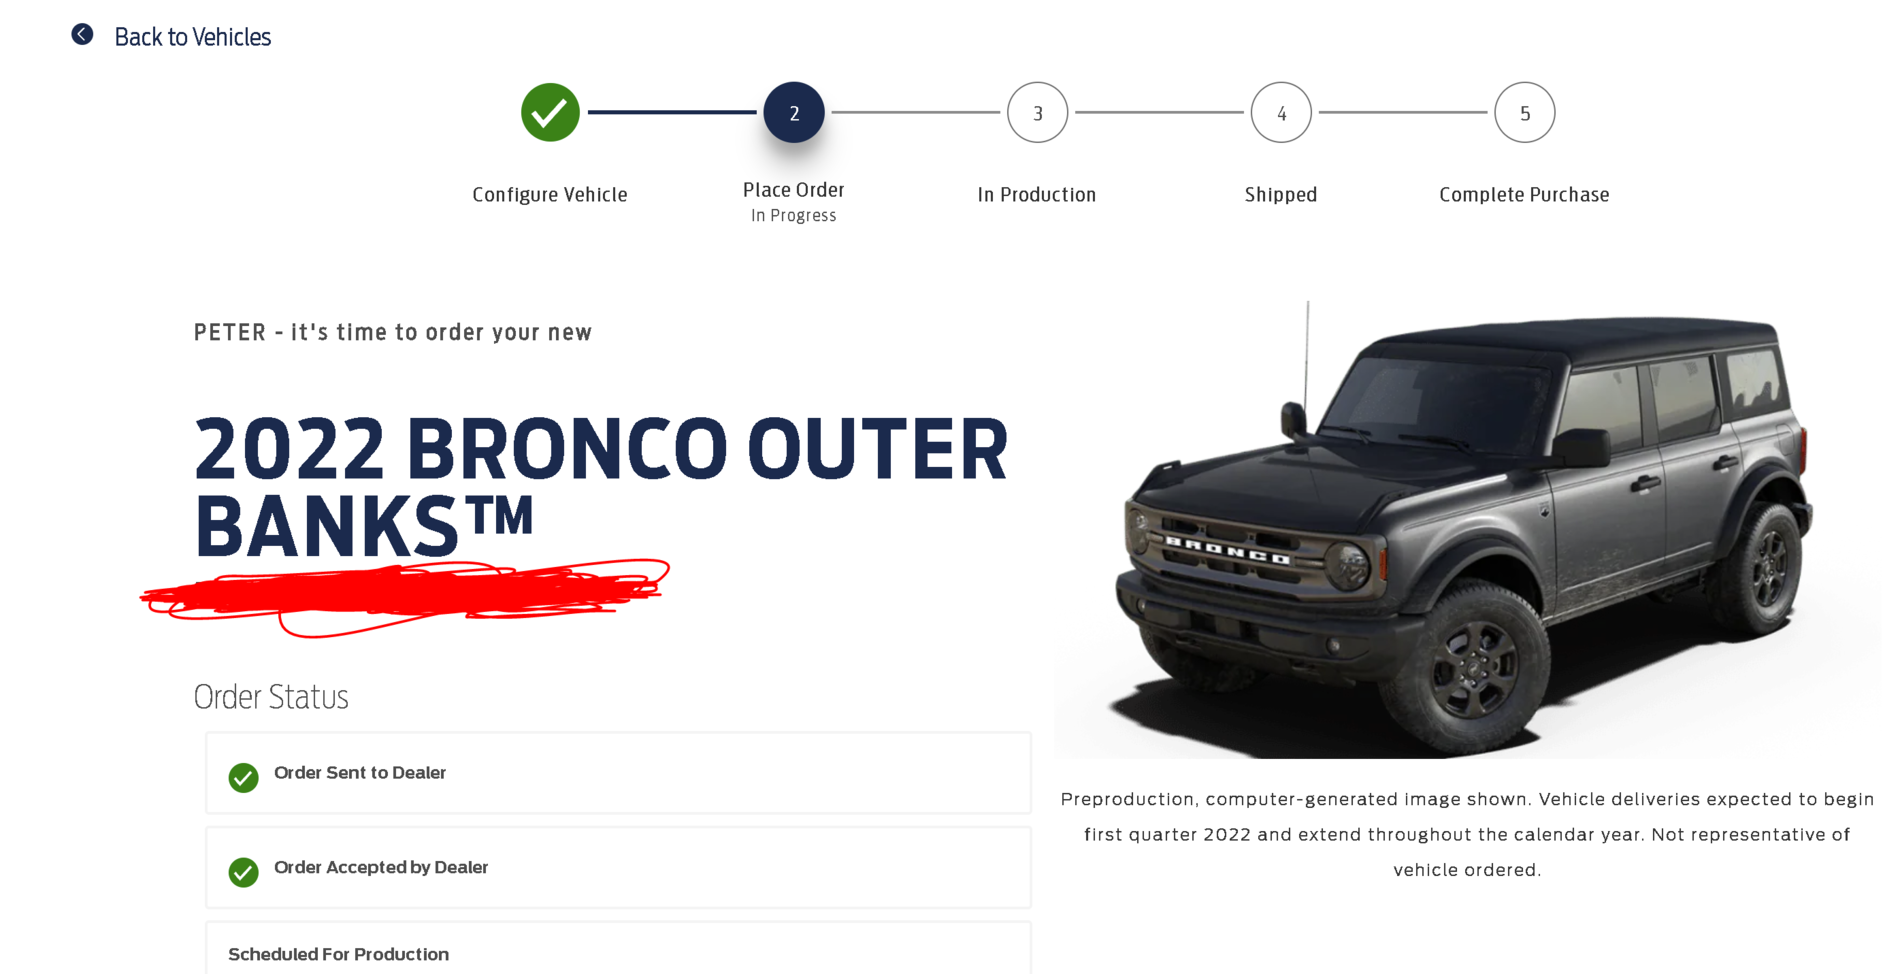 Ford Bronco Nov 1 Update - 2022 order confirmation email from Ford 1635191276208